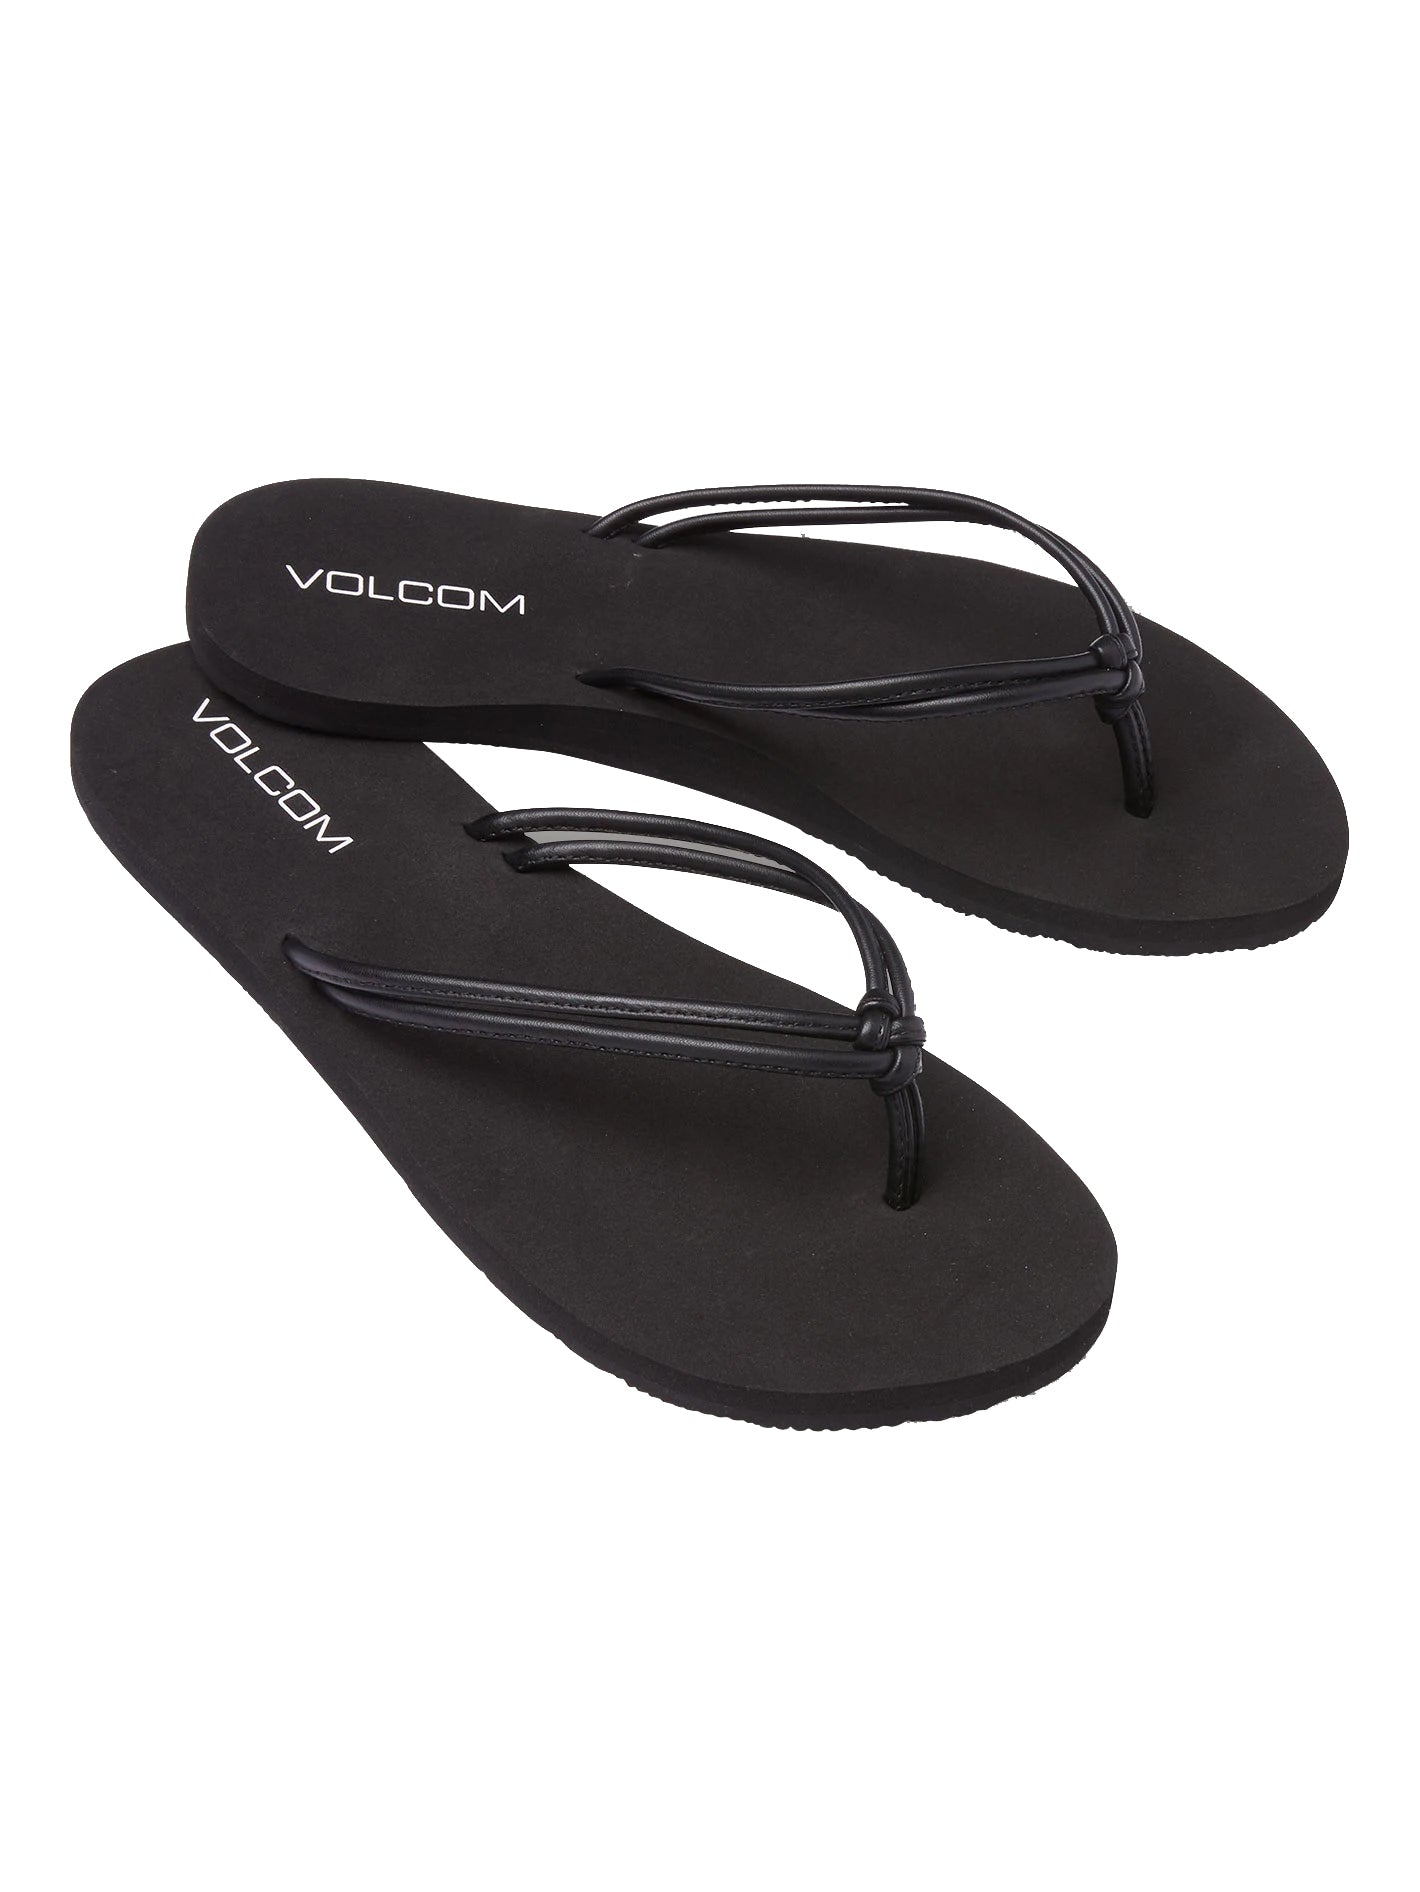 Volcom Forever and Ever 2 Womens Sandal BKO-Black Out 6